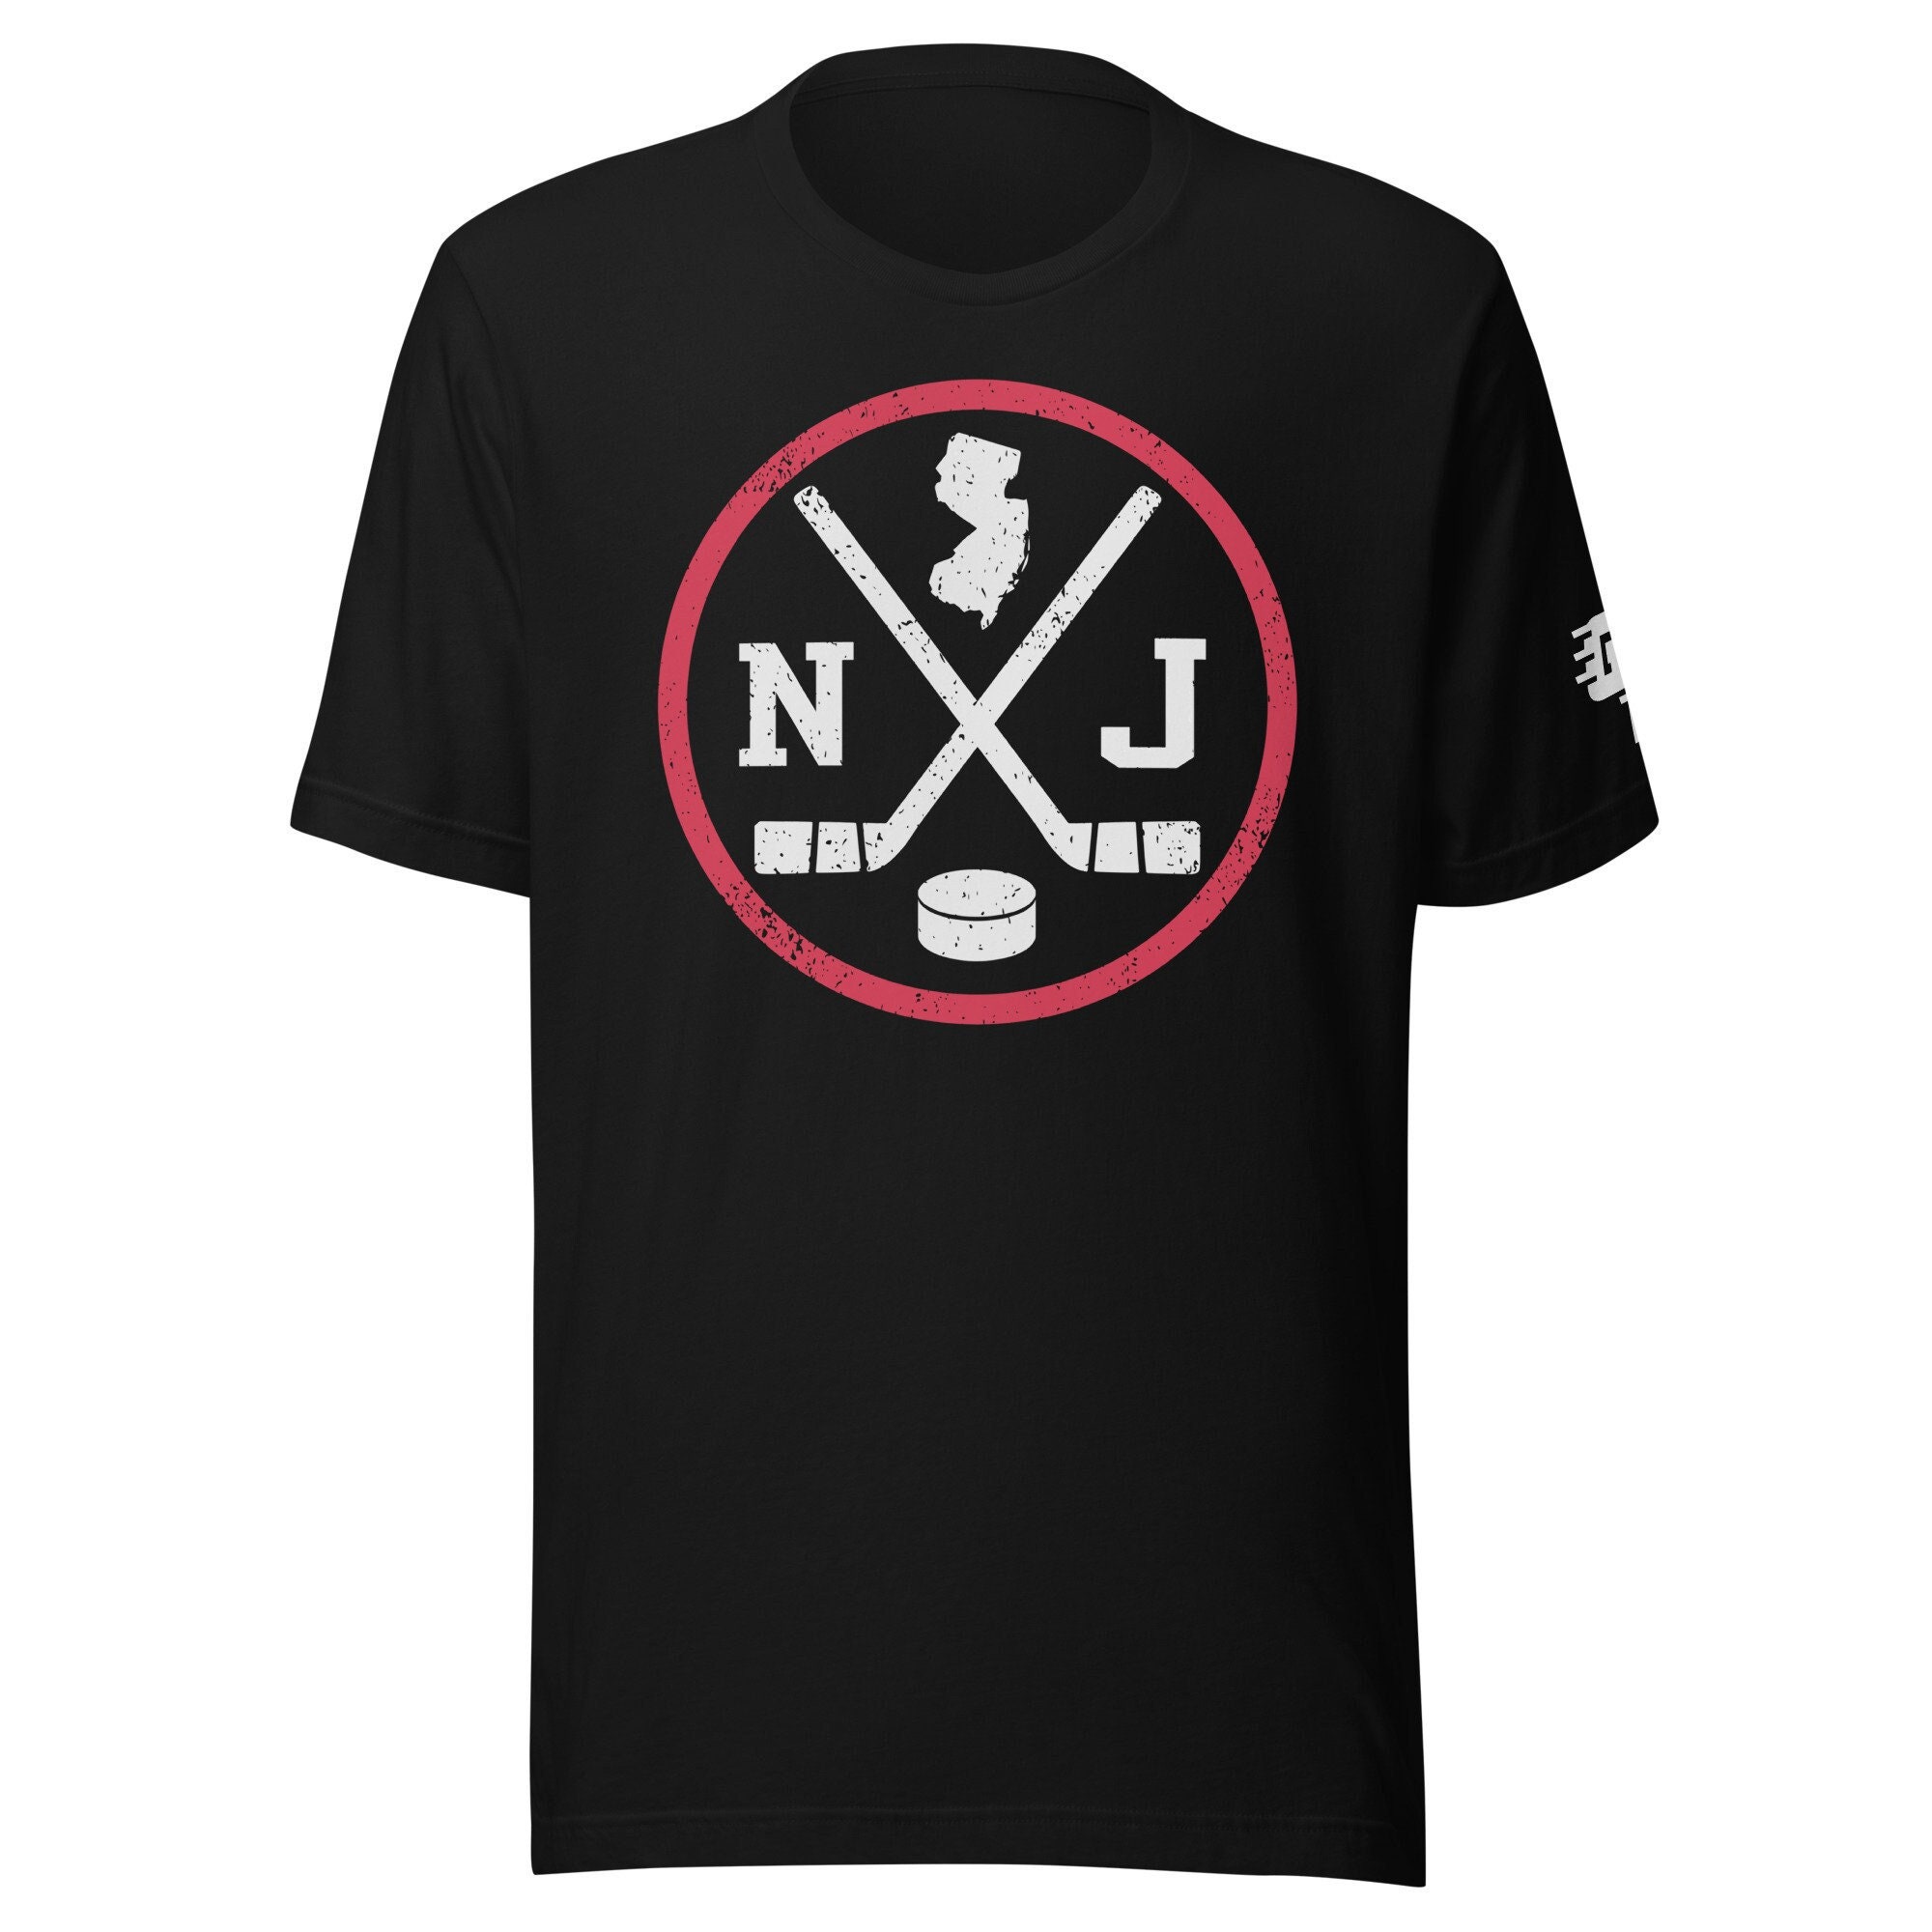 New NHL New Jersey Devils old time jersey style mid weight cotton